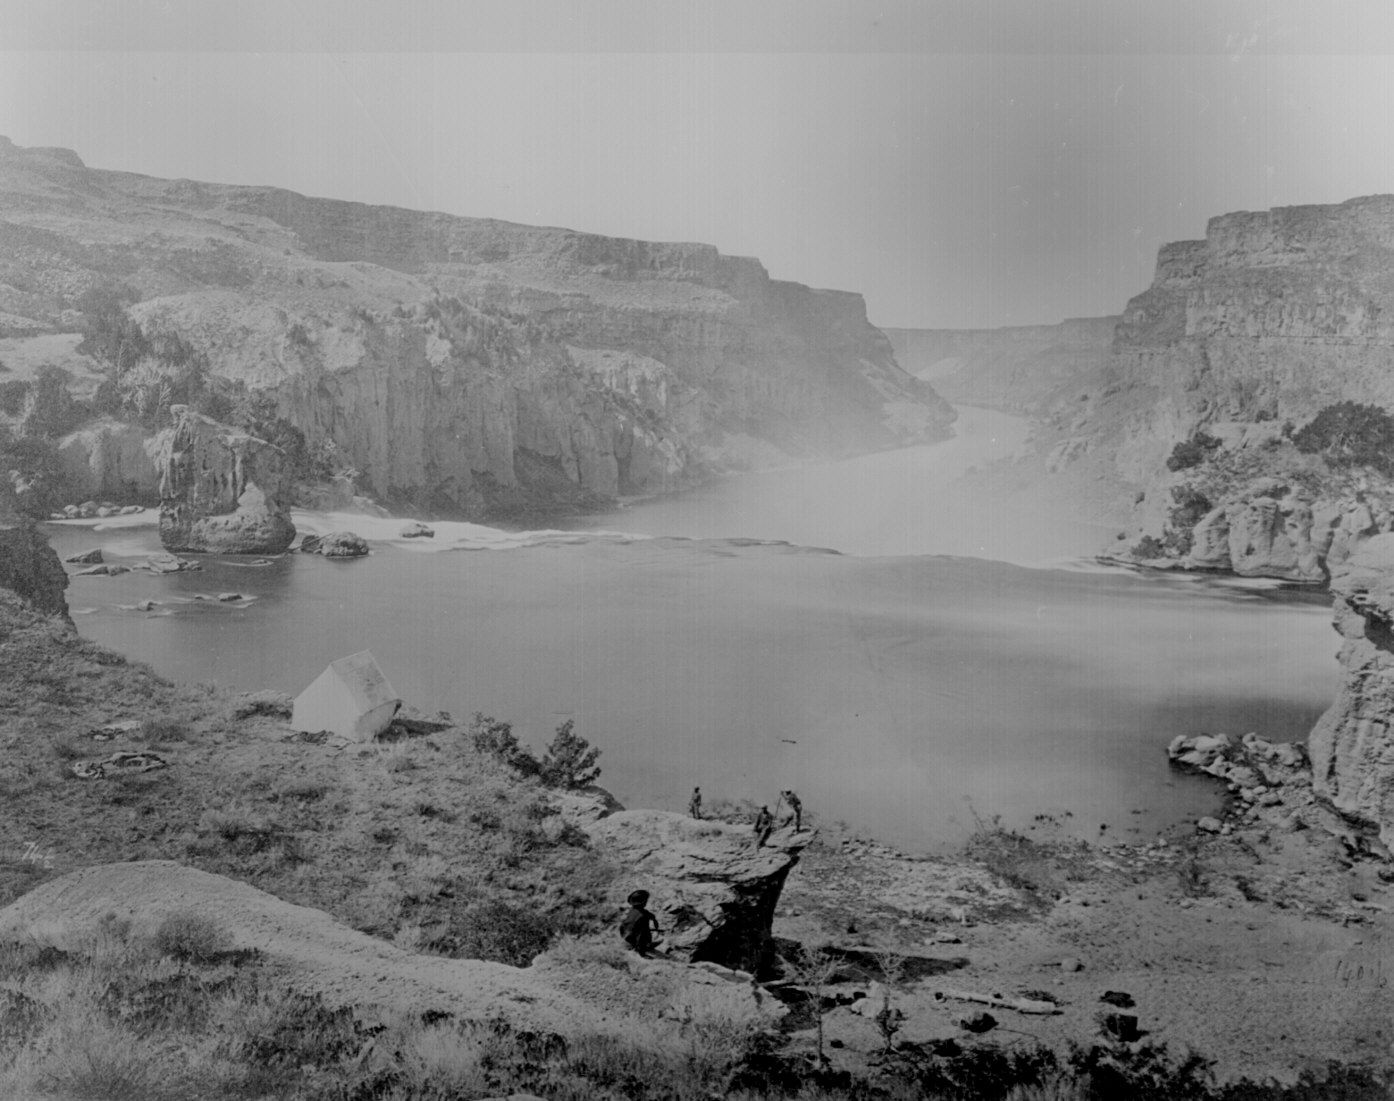 These Old Photos From The American West Will Make You Yearn For A Better Time image 1